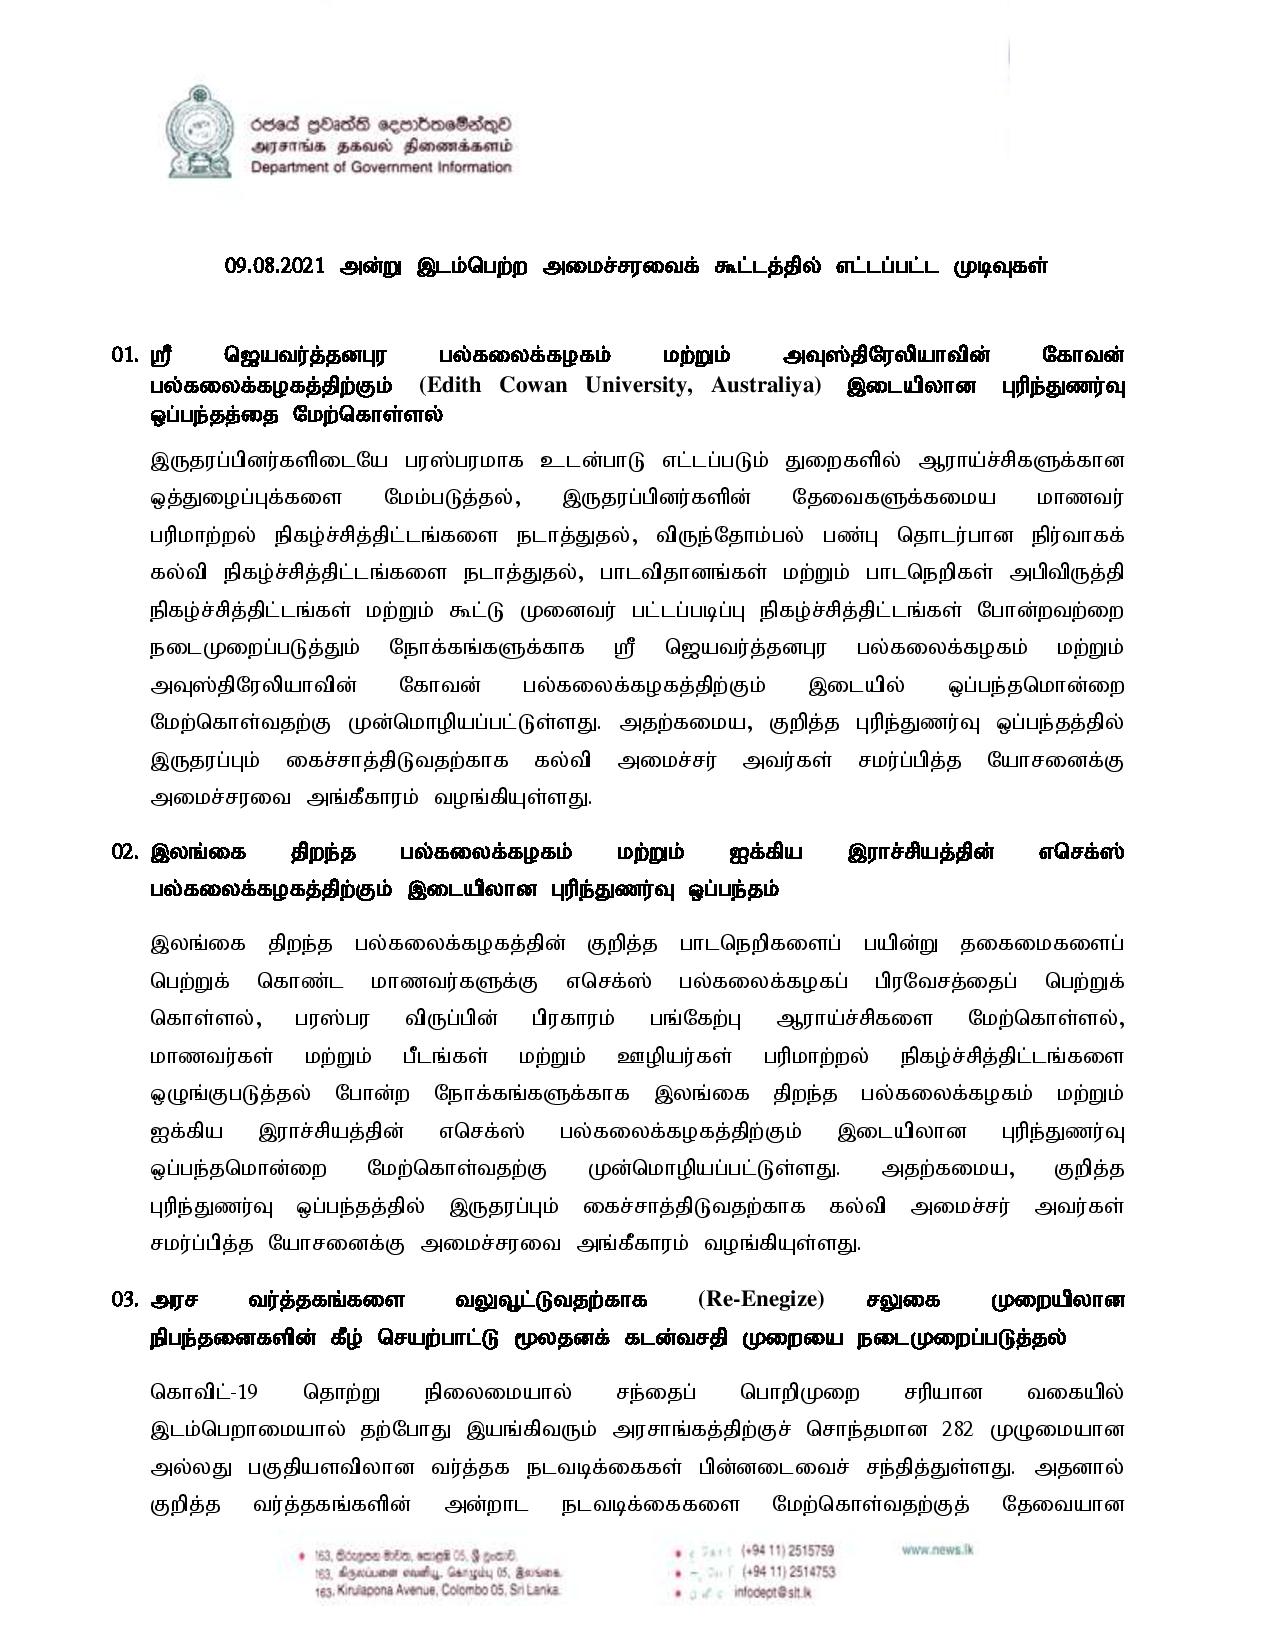 Cabinet Decision on 2021.08.09 Tamil page 001